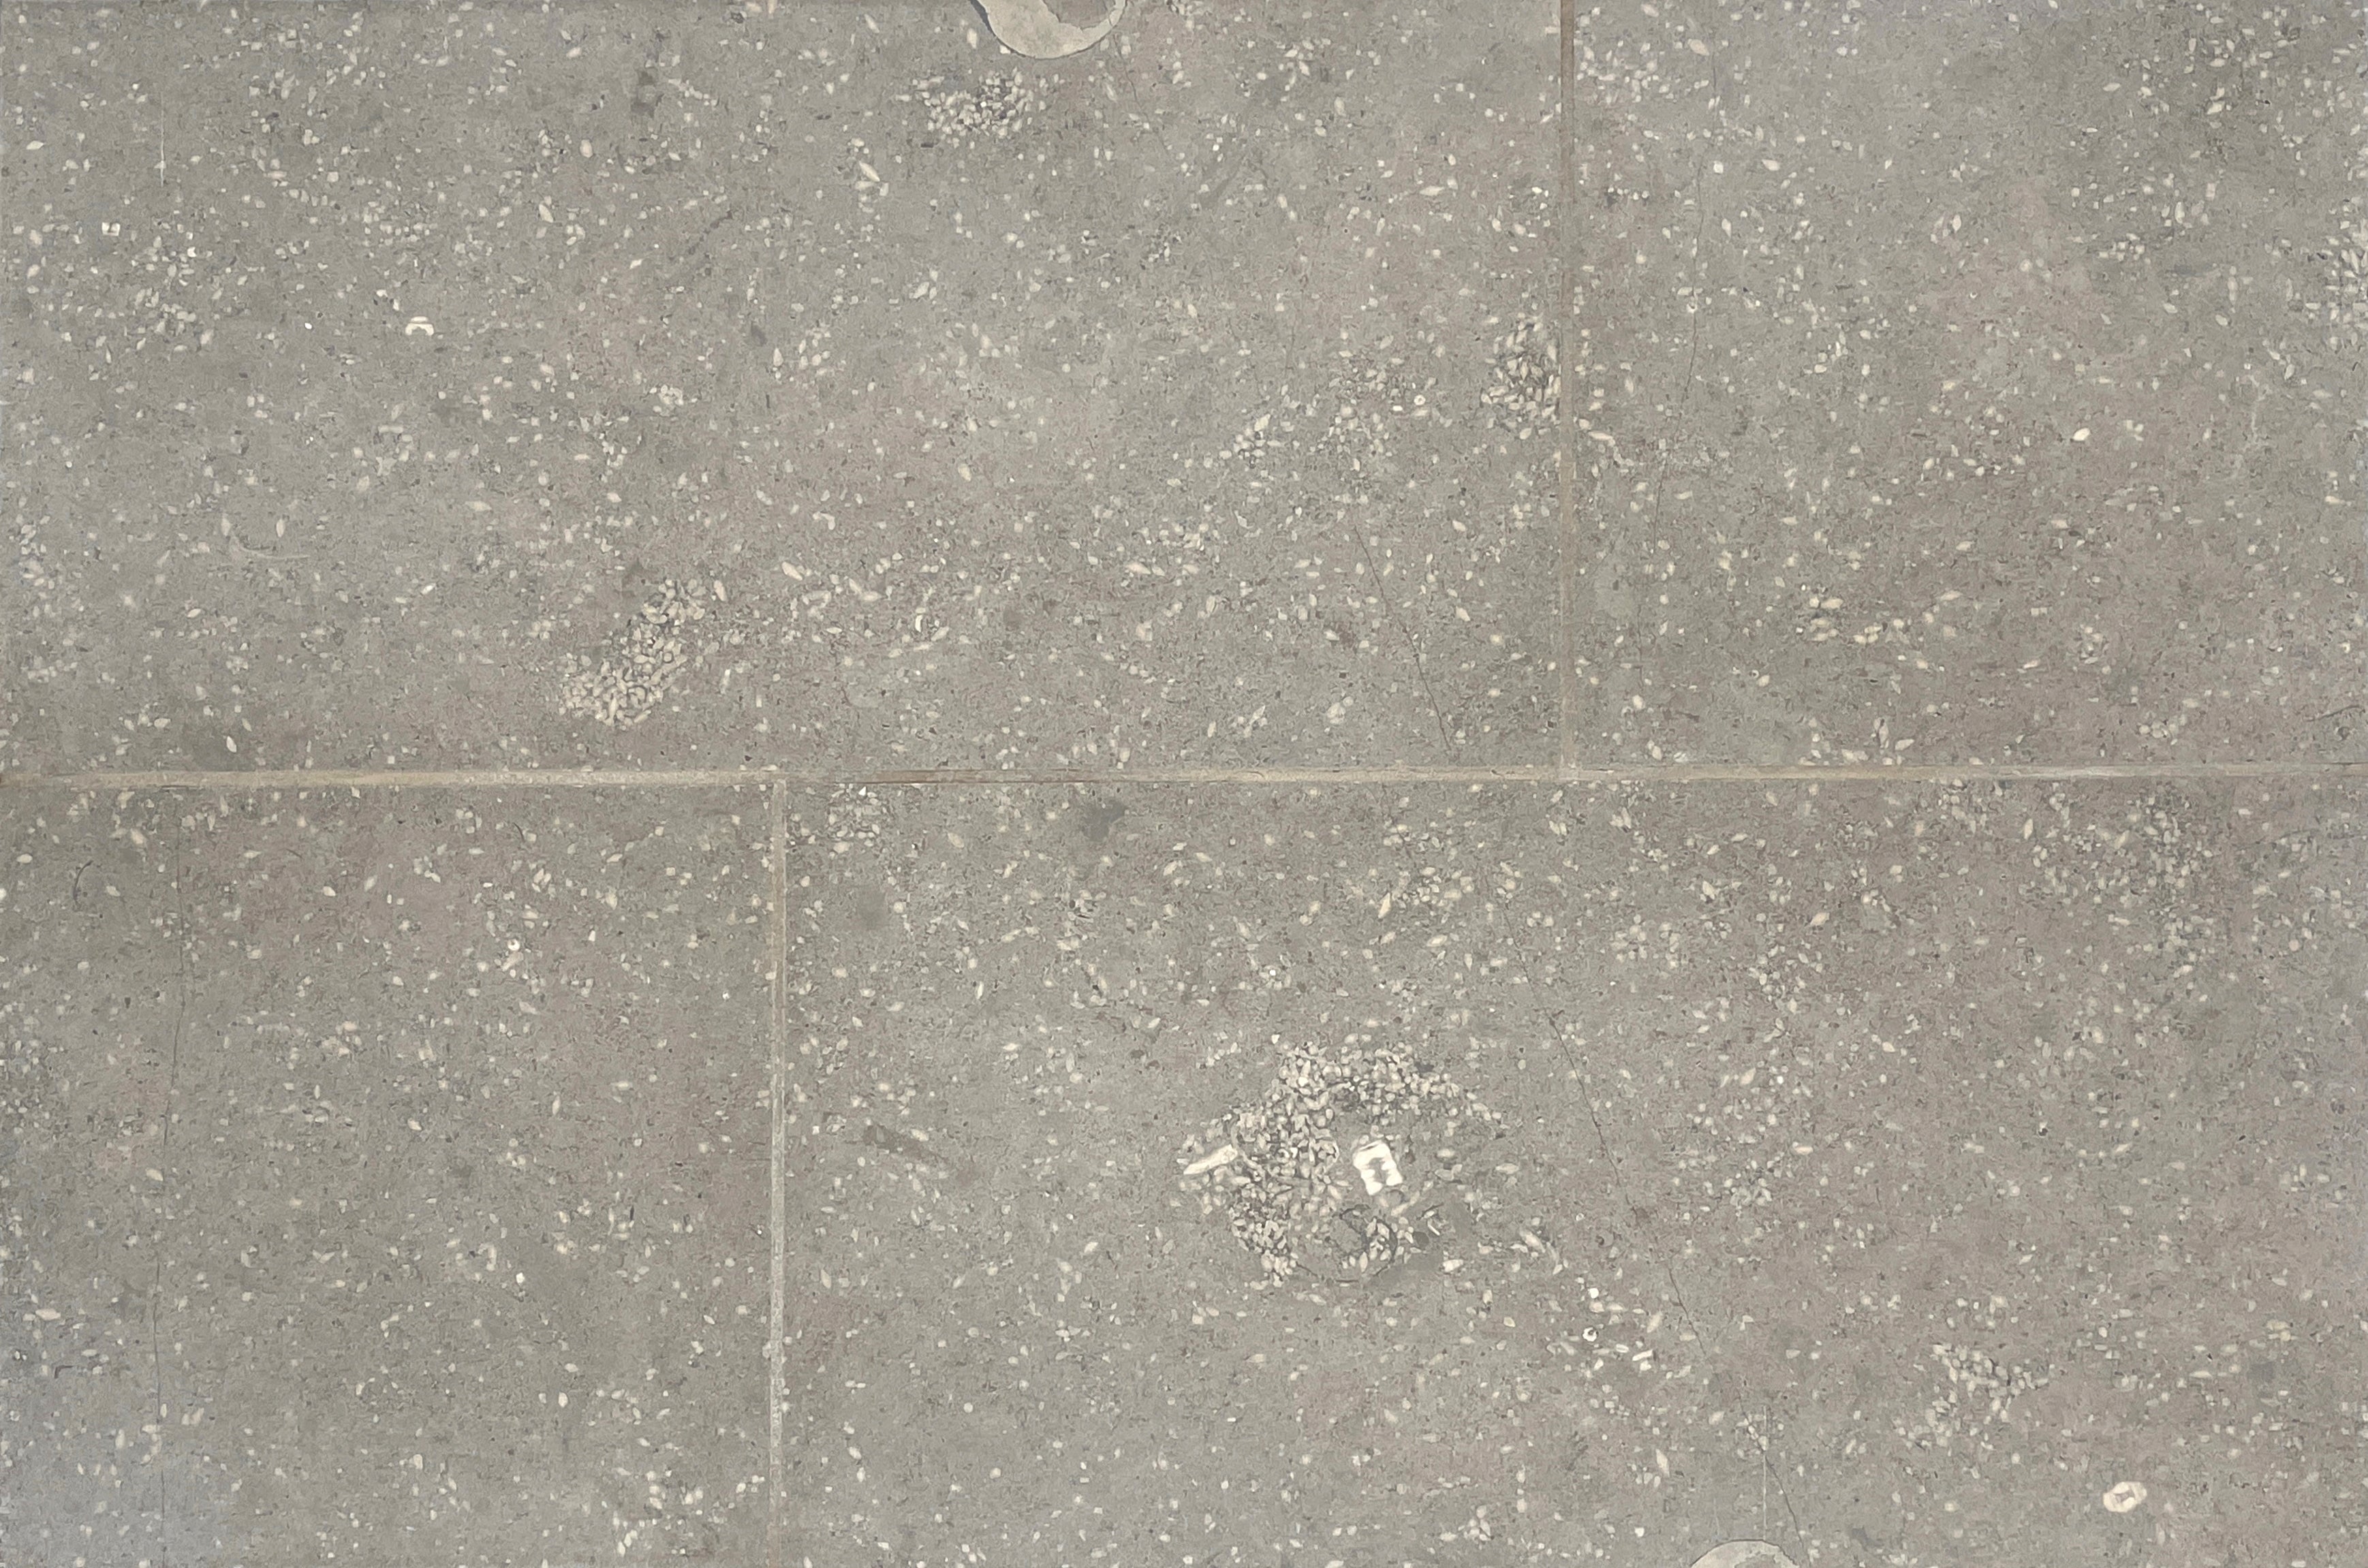 american limestone fossil star grey versailles pattern interior natural stone tile for floor and wall made in united states distributed by surface group international